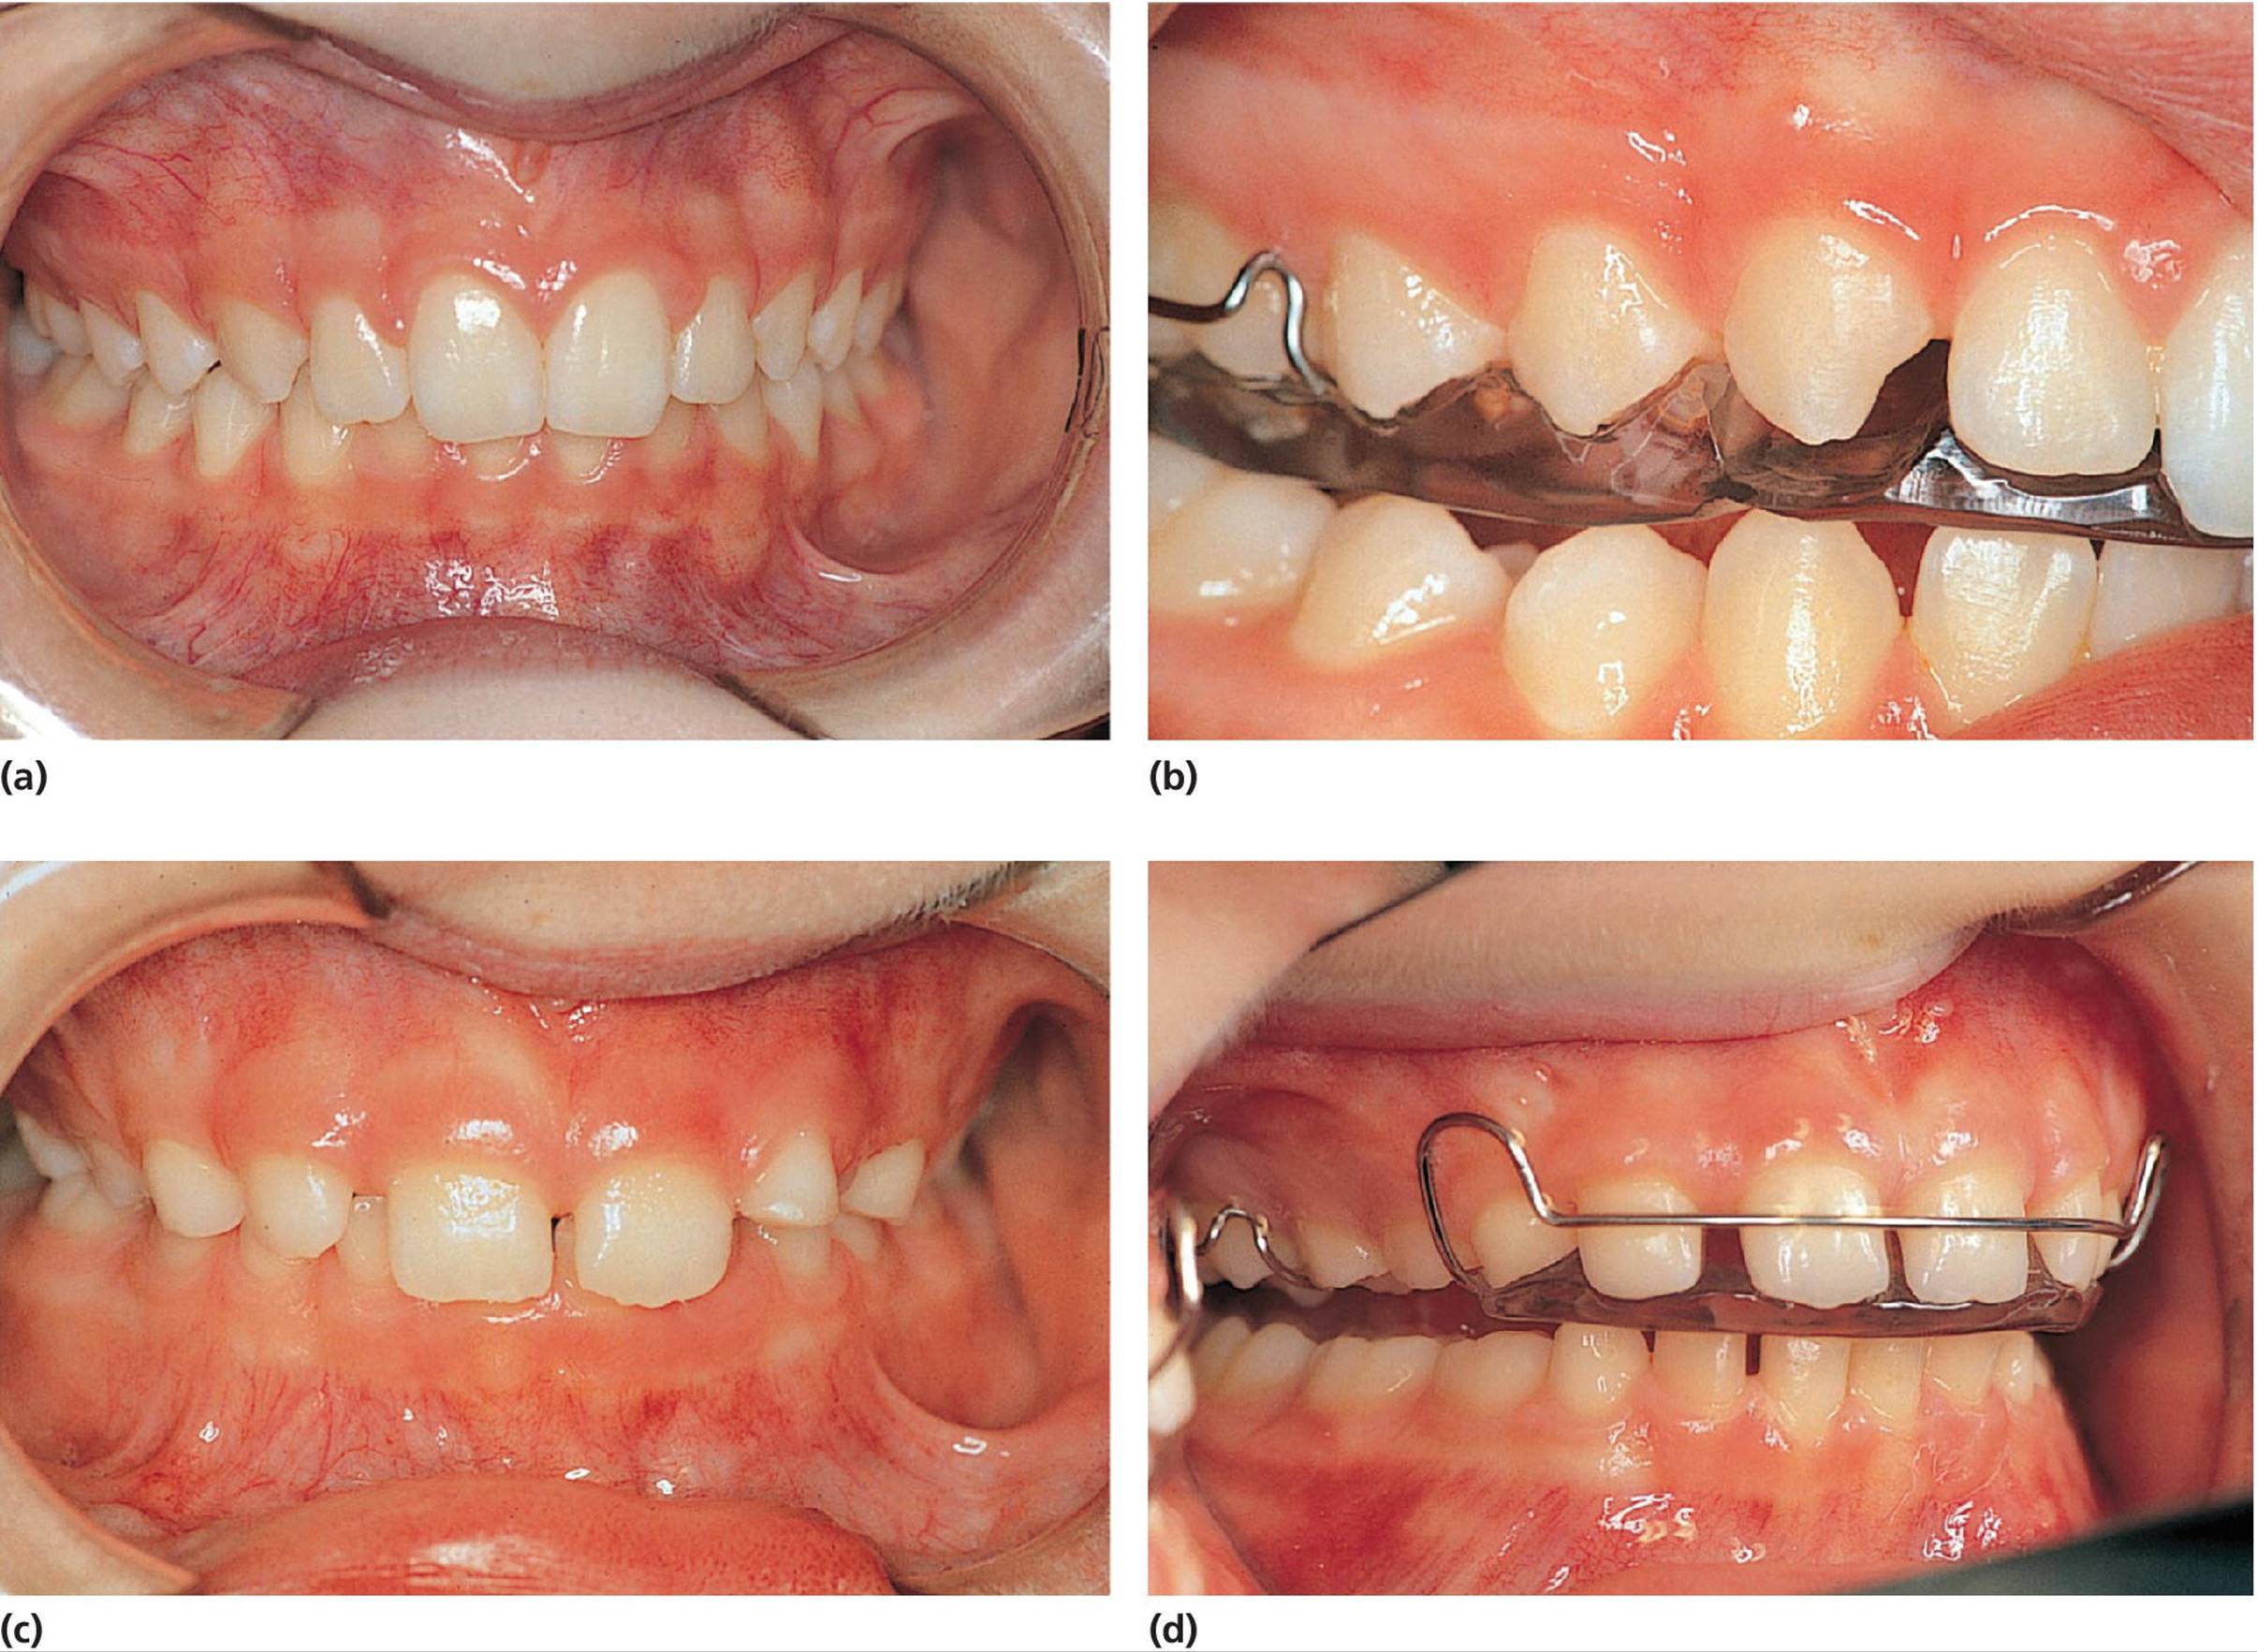 Four photos featuring a 12‐year‐old girl’s canines in the maxilla, a hard acrylic appliance (shore‐plate), a 7‐year‐old boy with mixed dentition and a deep bite, and hard acrylic bite‐plate to prevent teeth wear.